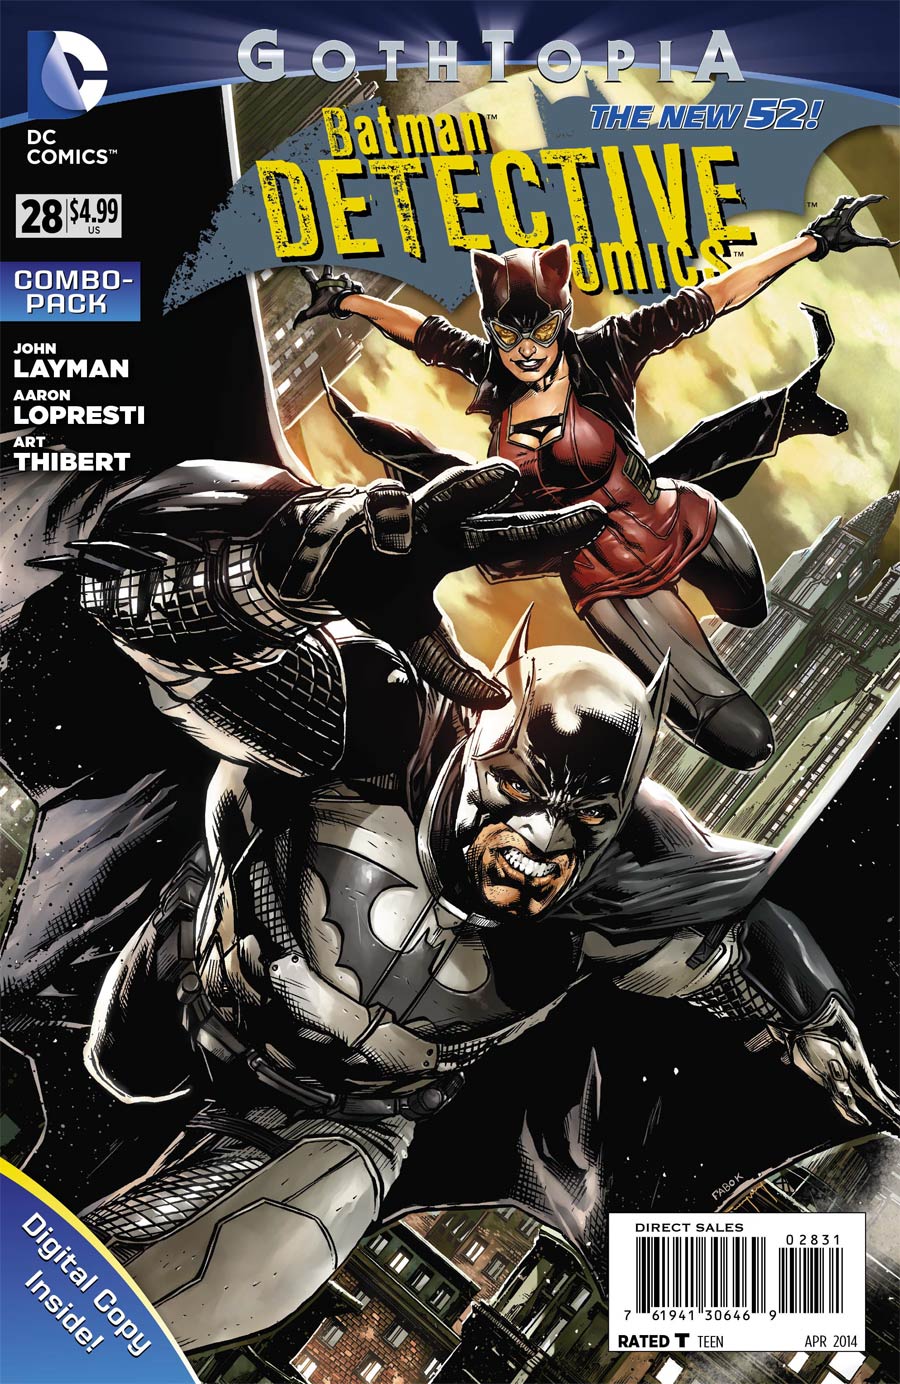 Detective Comics Vol 2 #28 Cover C Combo Pack Without Polybag (Gothtopia Tie-In)